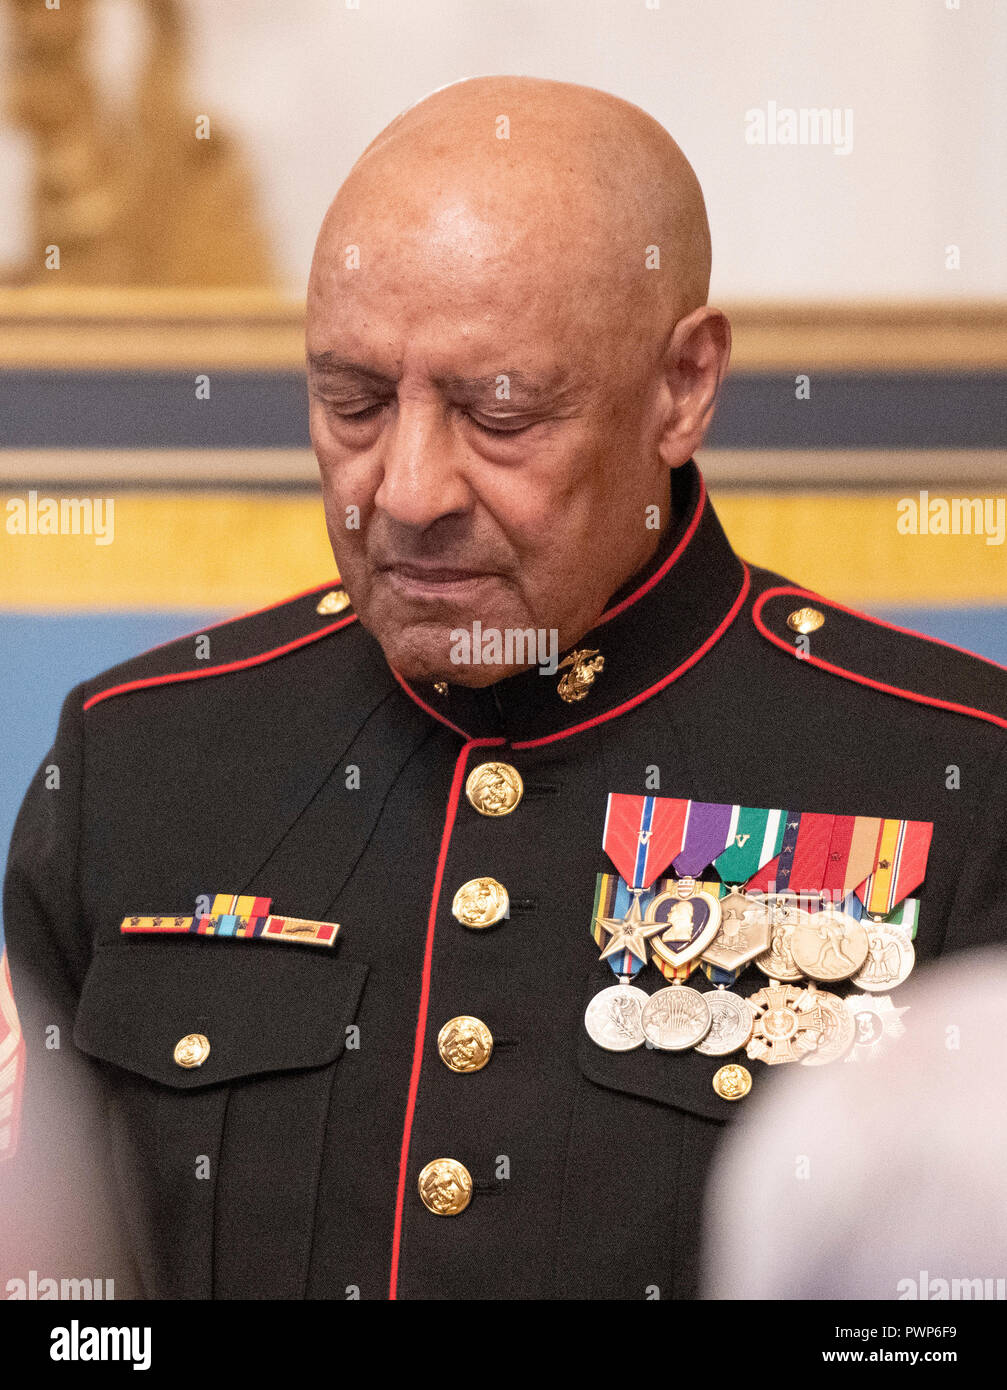 Washington, USA. 17th Oct 2018. Sergeant Major John L. Canley, United States Marine Corps (Retired) bows his head in prayer during the ceremony where US President Donald J. Trump awarded him the Medal of Honor for conspicuous gallantry during the Vietnam War in a ceremony in the East Room of the the White House in Washington, DC on Wednesday, October 17, 2018. Credit: Ron Sachs/CNP/MediaPunch Credit: MediaPunch Inc/Alamy Live News Stock Photo